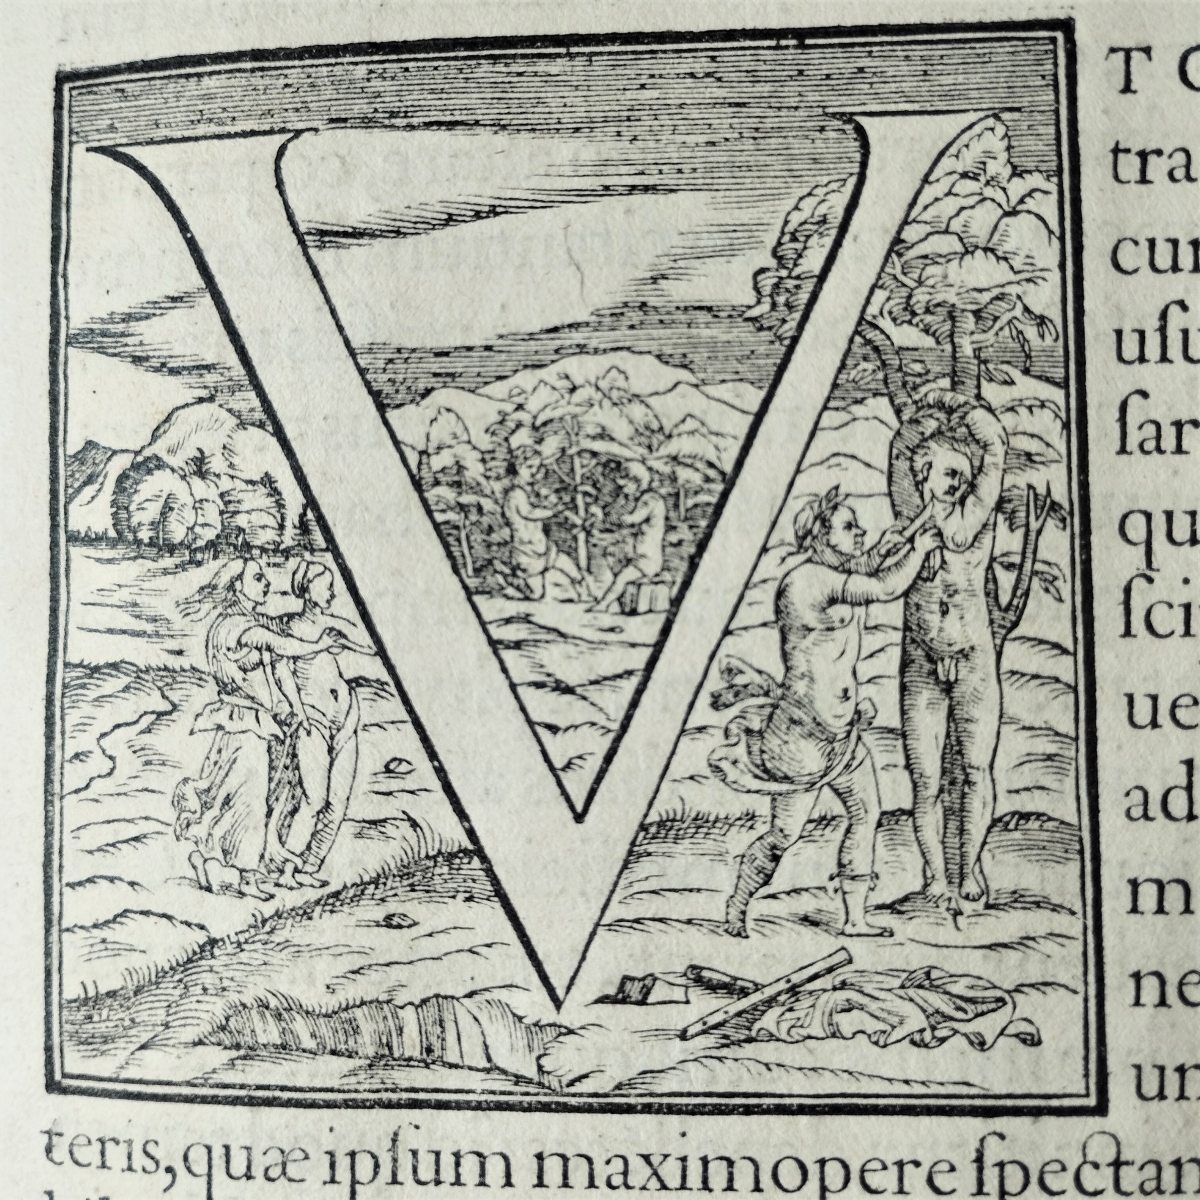 Decorated initial, letter V. On the right one man is cutting the throat of another man tied to a tree, on the left two women watch and point at them, at the far back two men are playing the flute. 